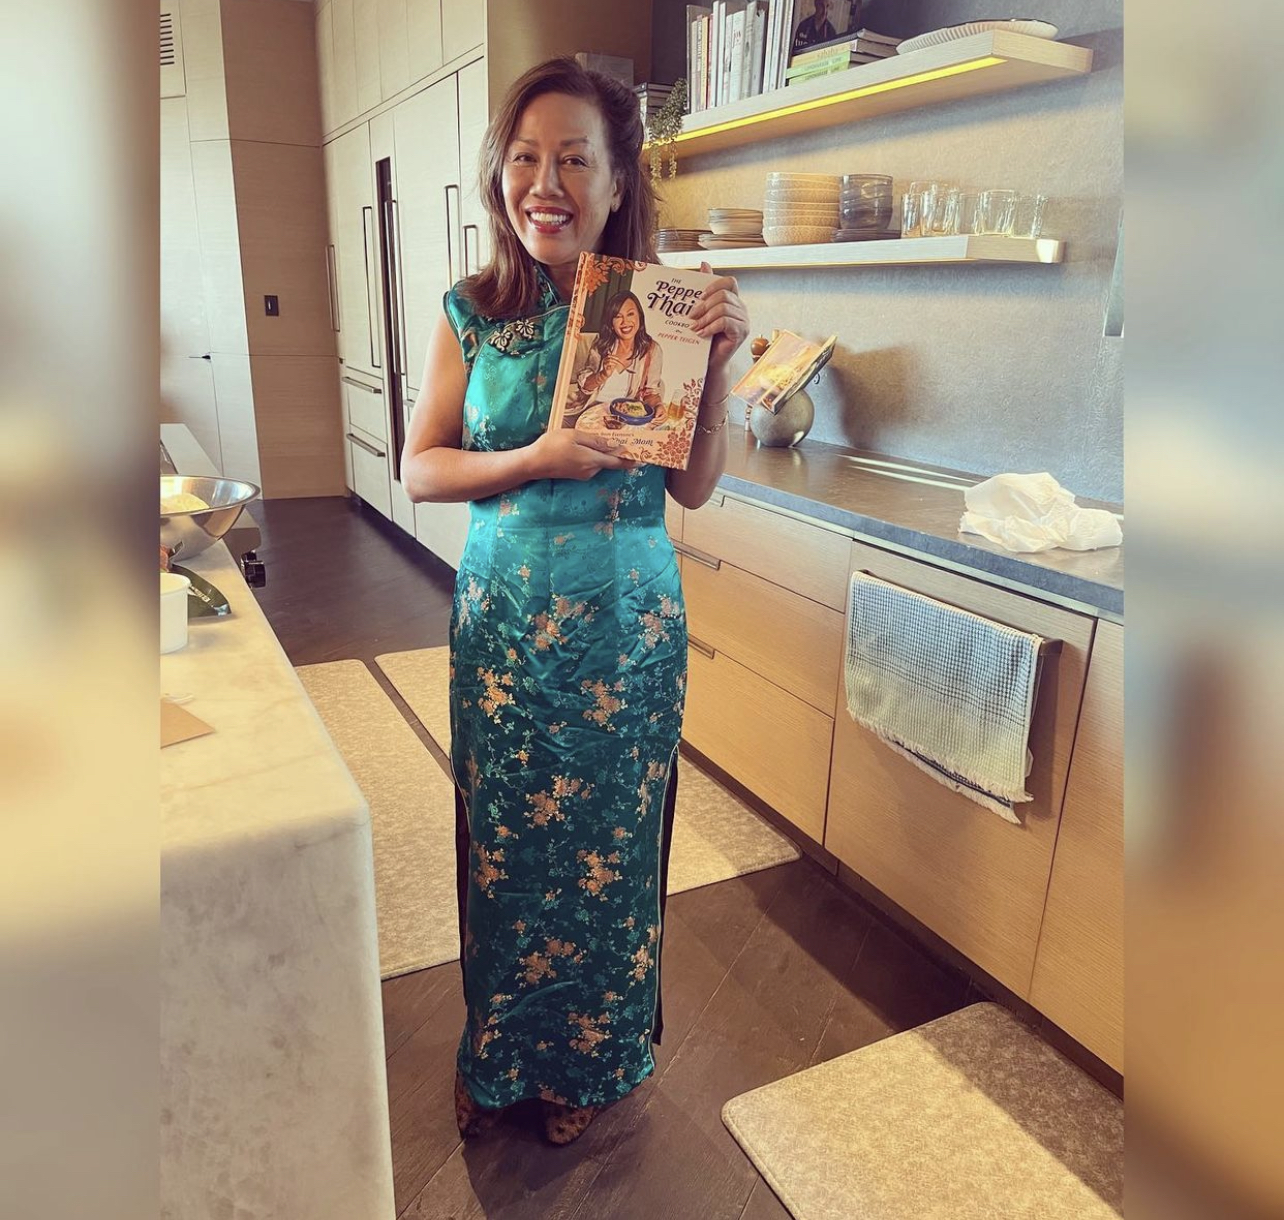 pepper vilailuck teigen shows off her cooking book The Pepper Thai Cookbook: Family Recipes From Everyone’s Favorite Thai Mom